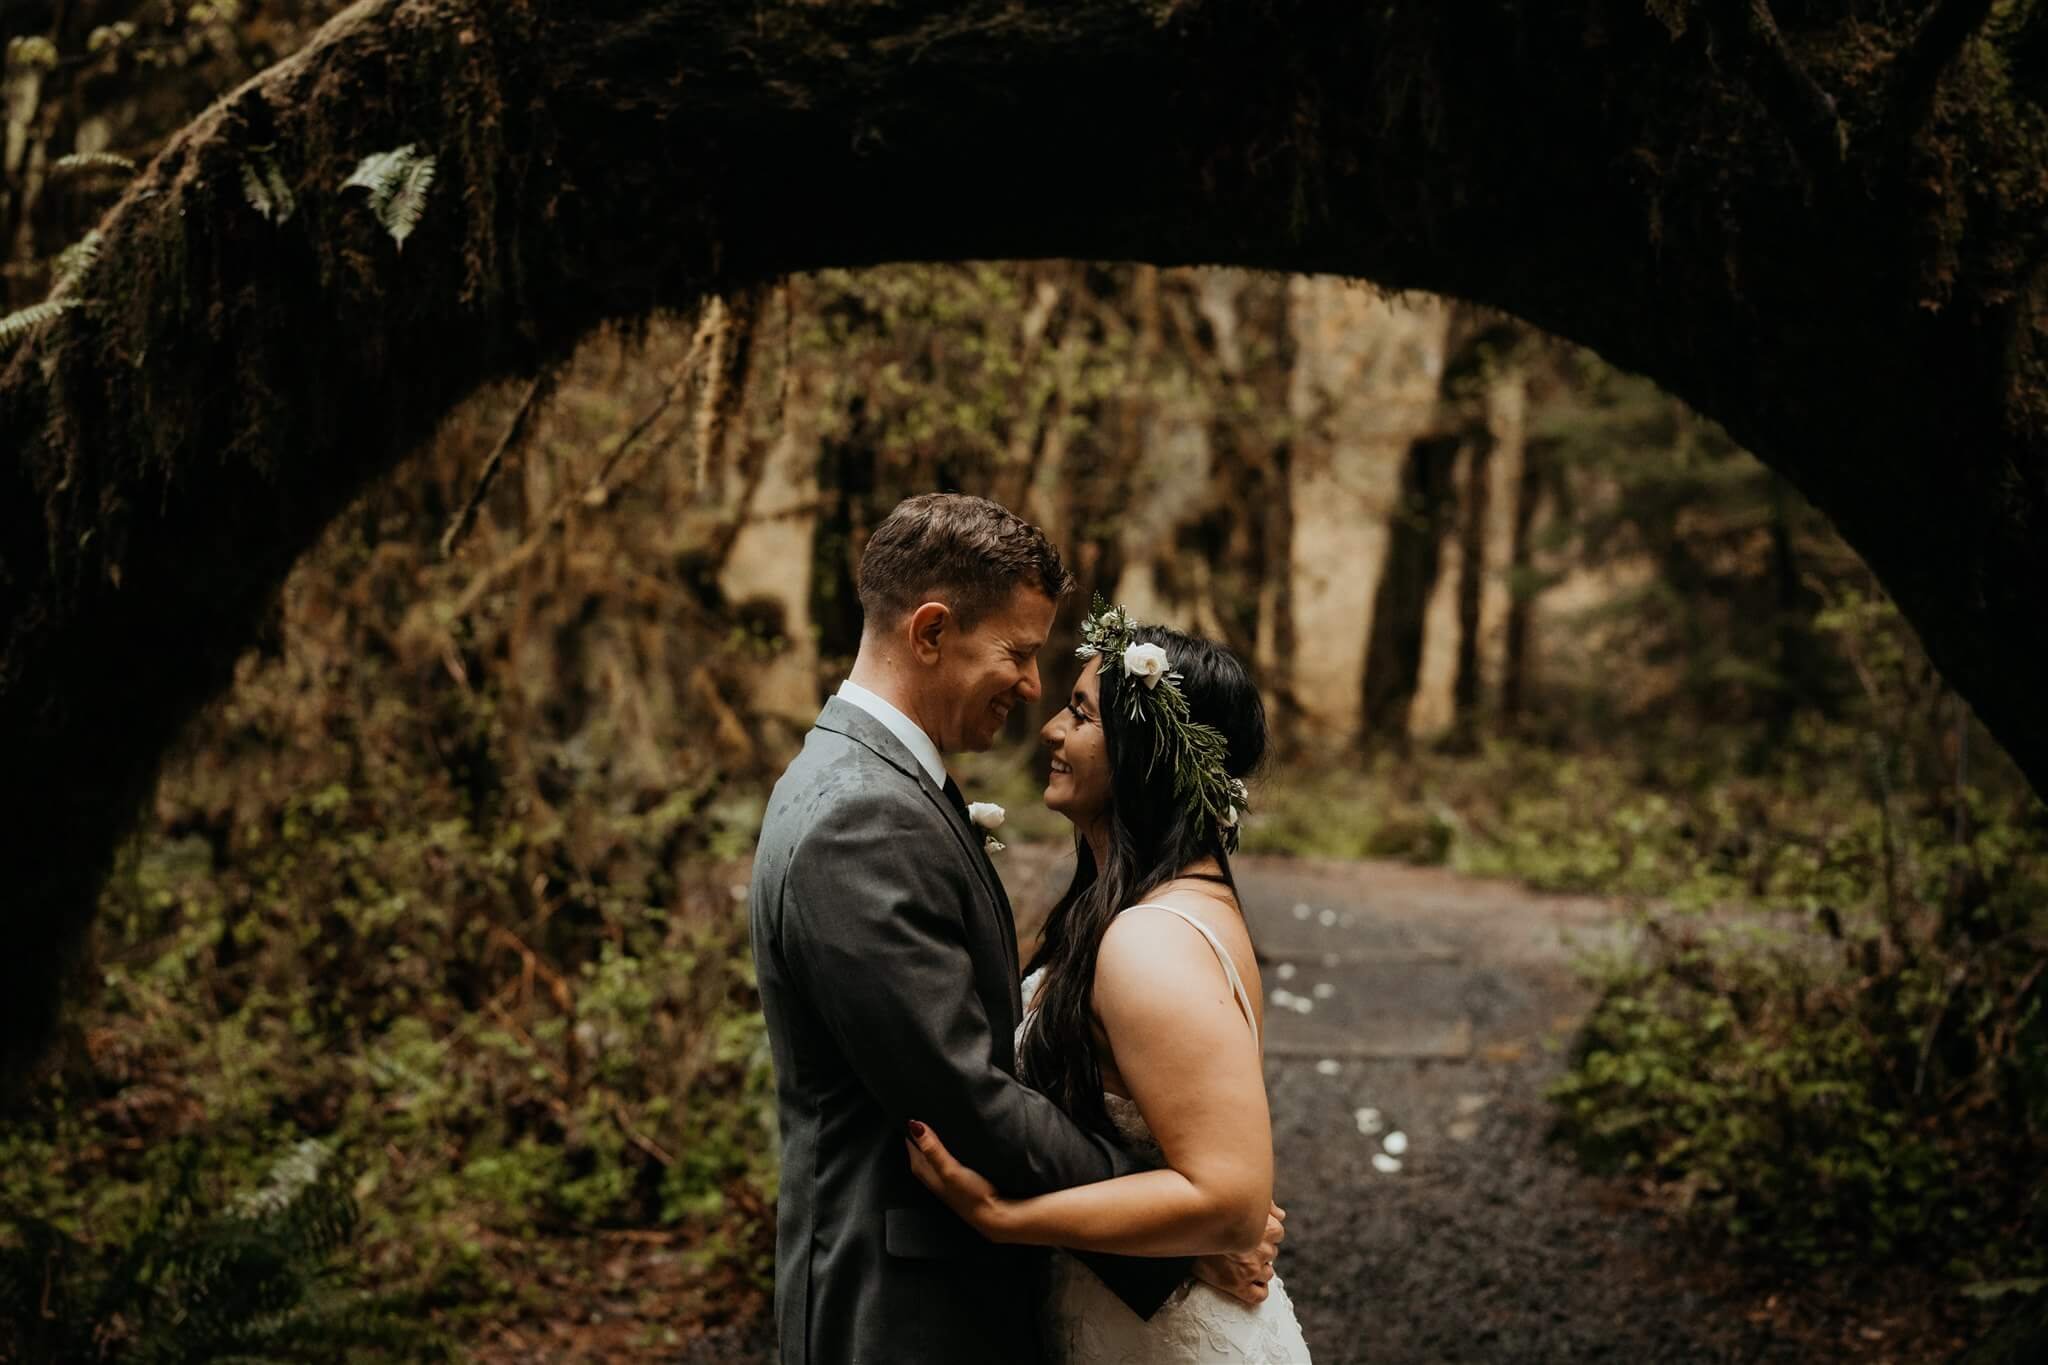 Wedding portraits in the Hoh Rainforest